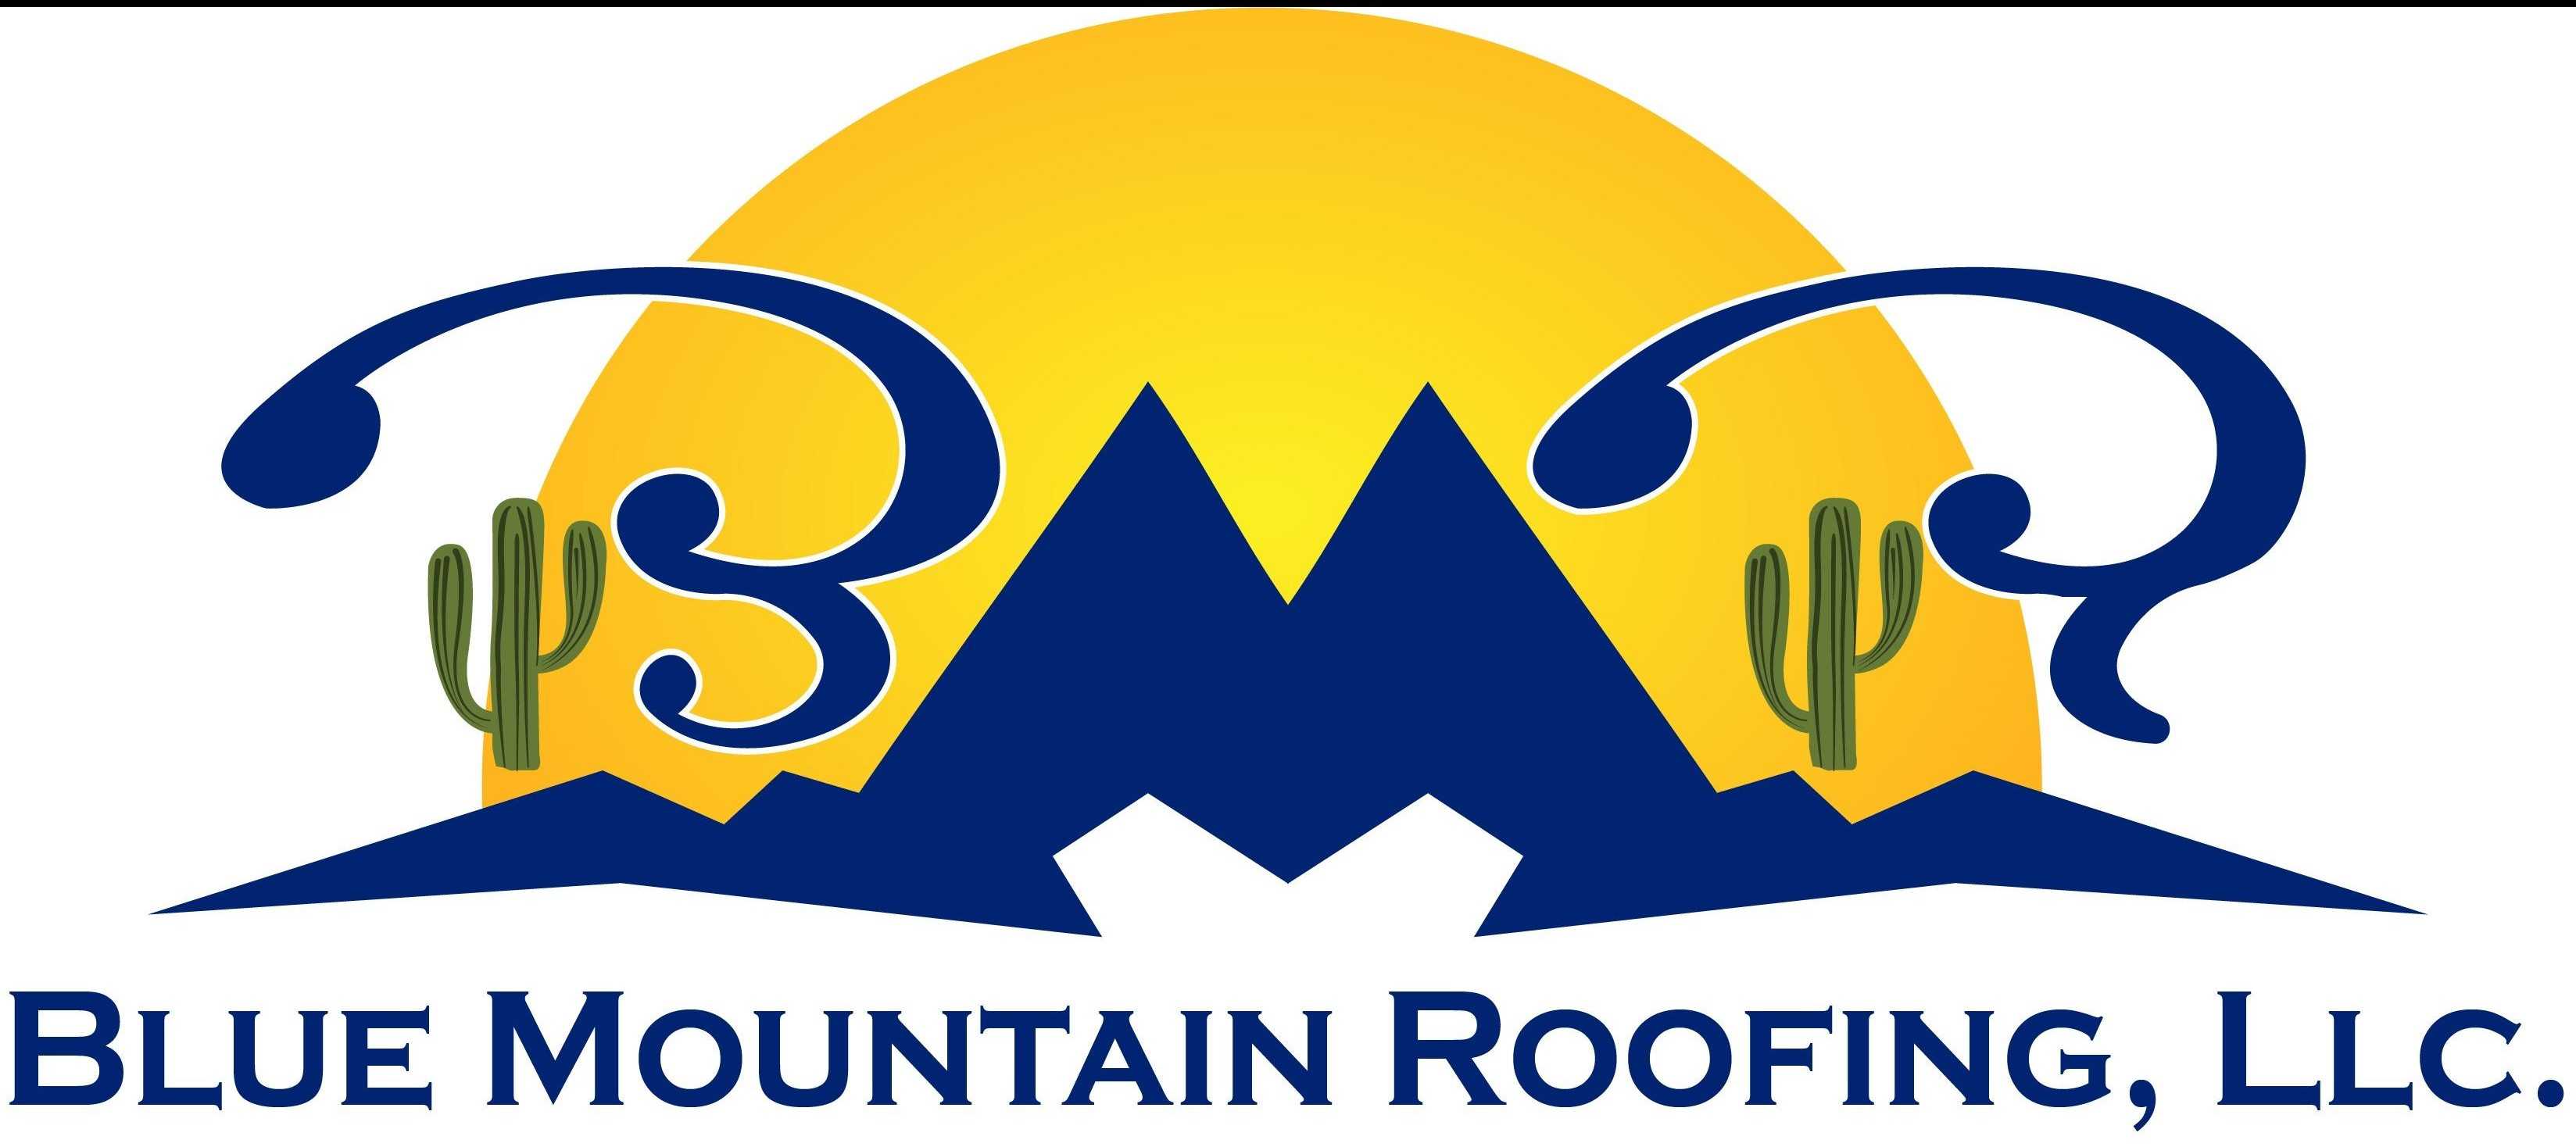 Blue Mountain Roofing Roof Repair Tucson